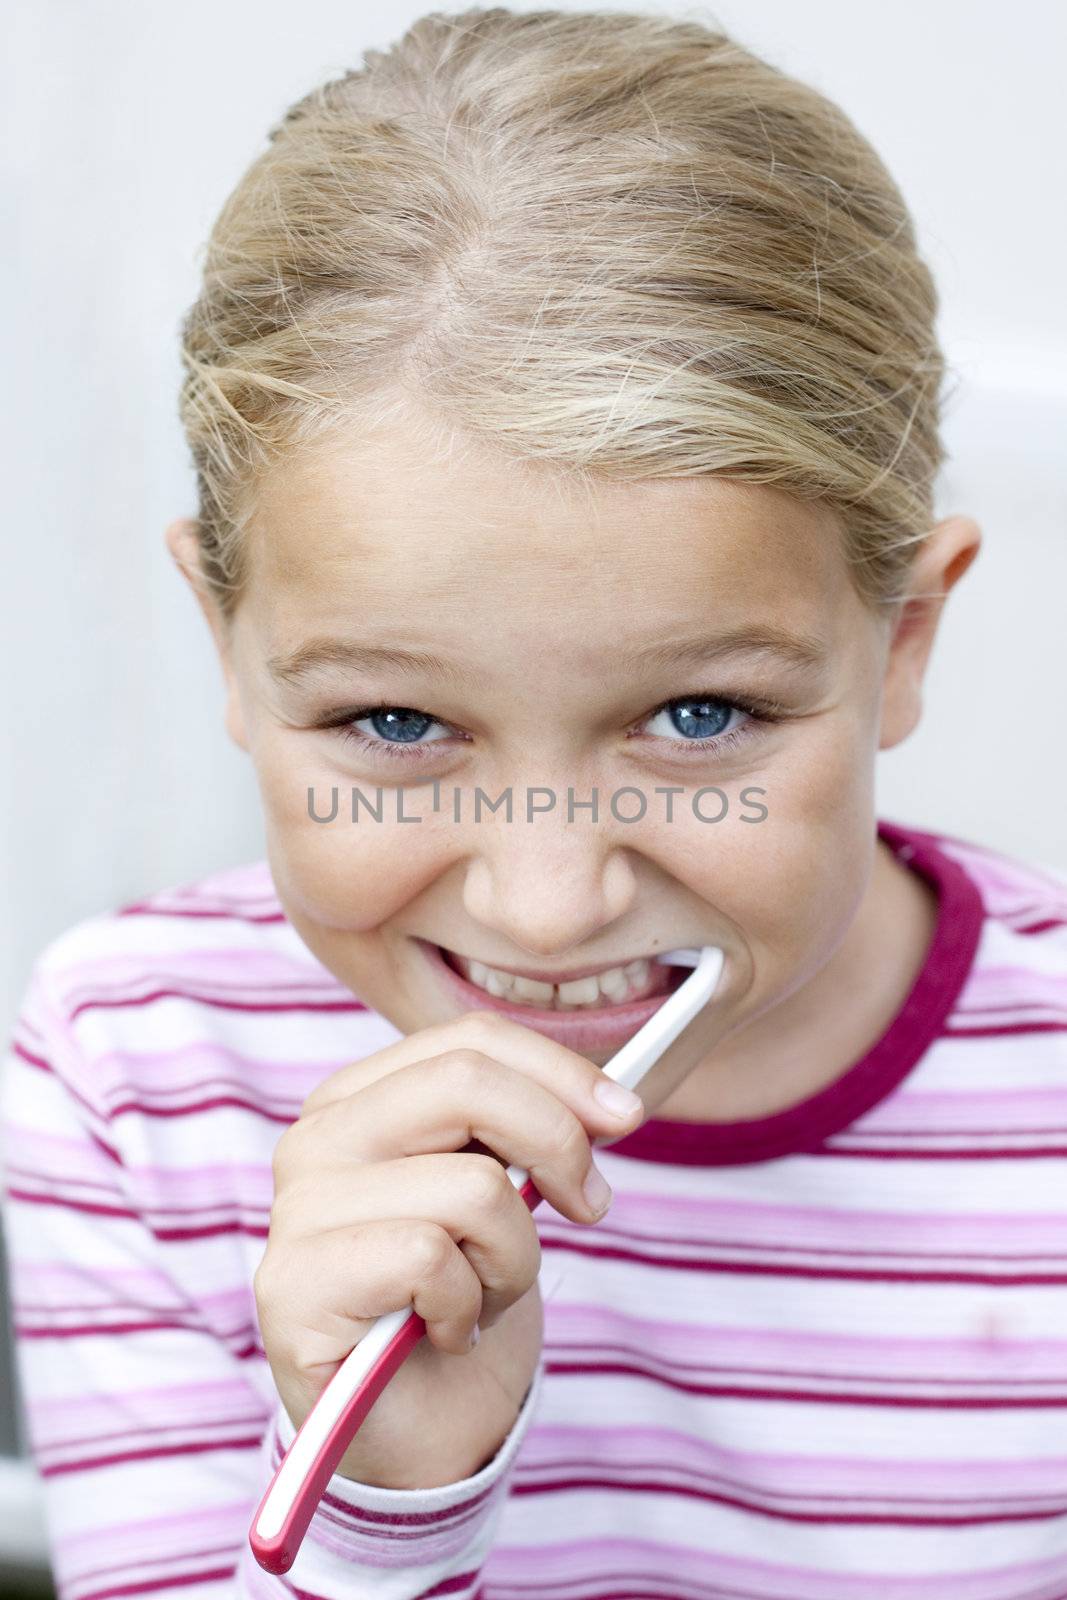 Child brushing teeth by annems